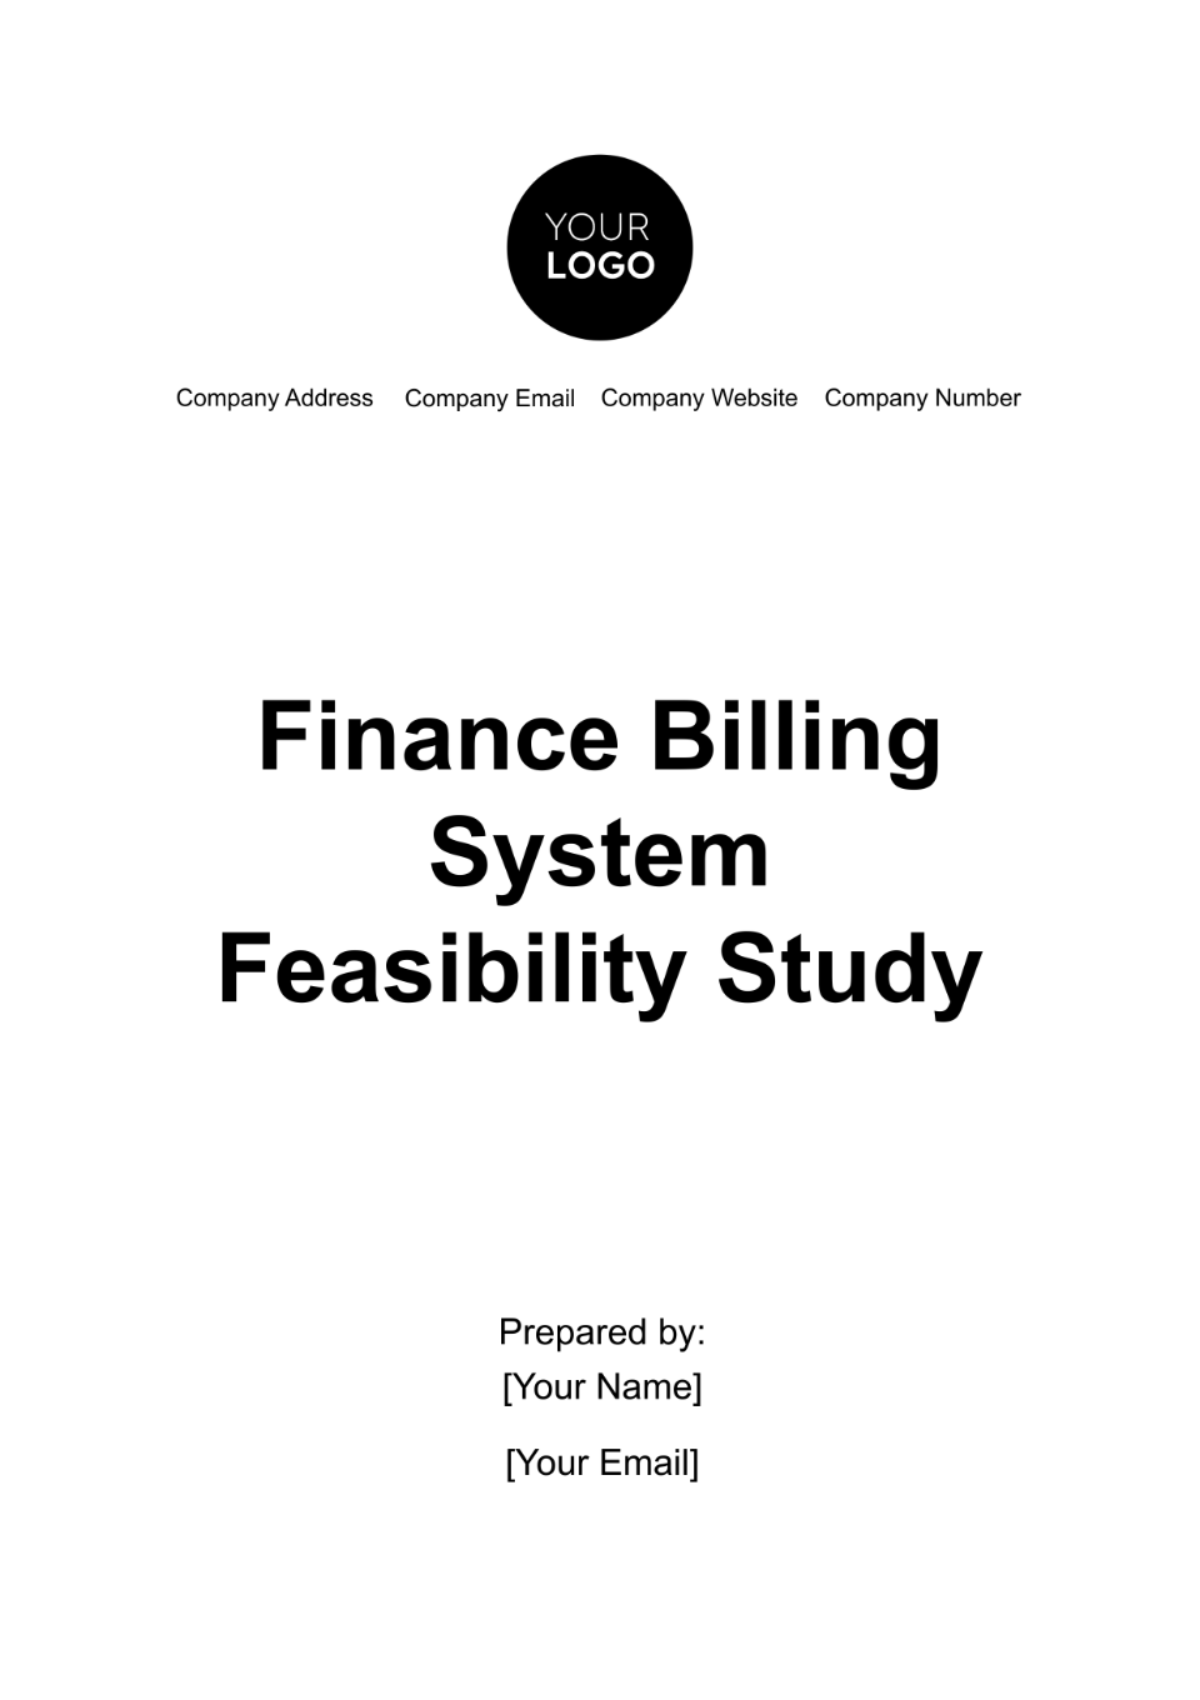 Finance Billing System Feasibility Study Template